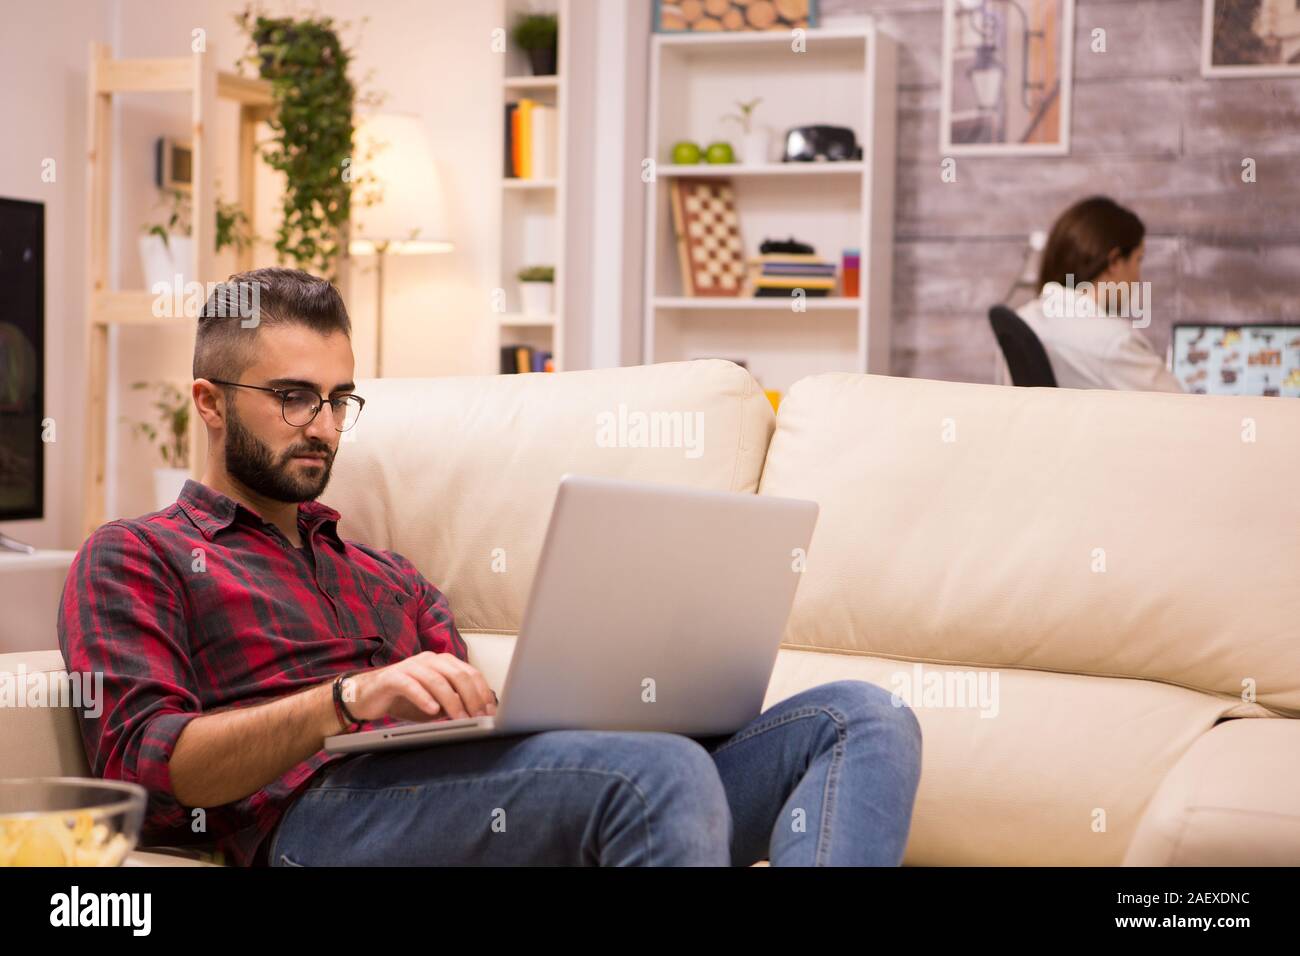 Young entrepreneur working on laptop sitting on sofa. Girlfriend in the background. Stock Photo